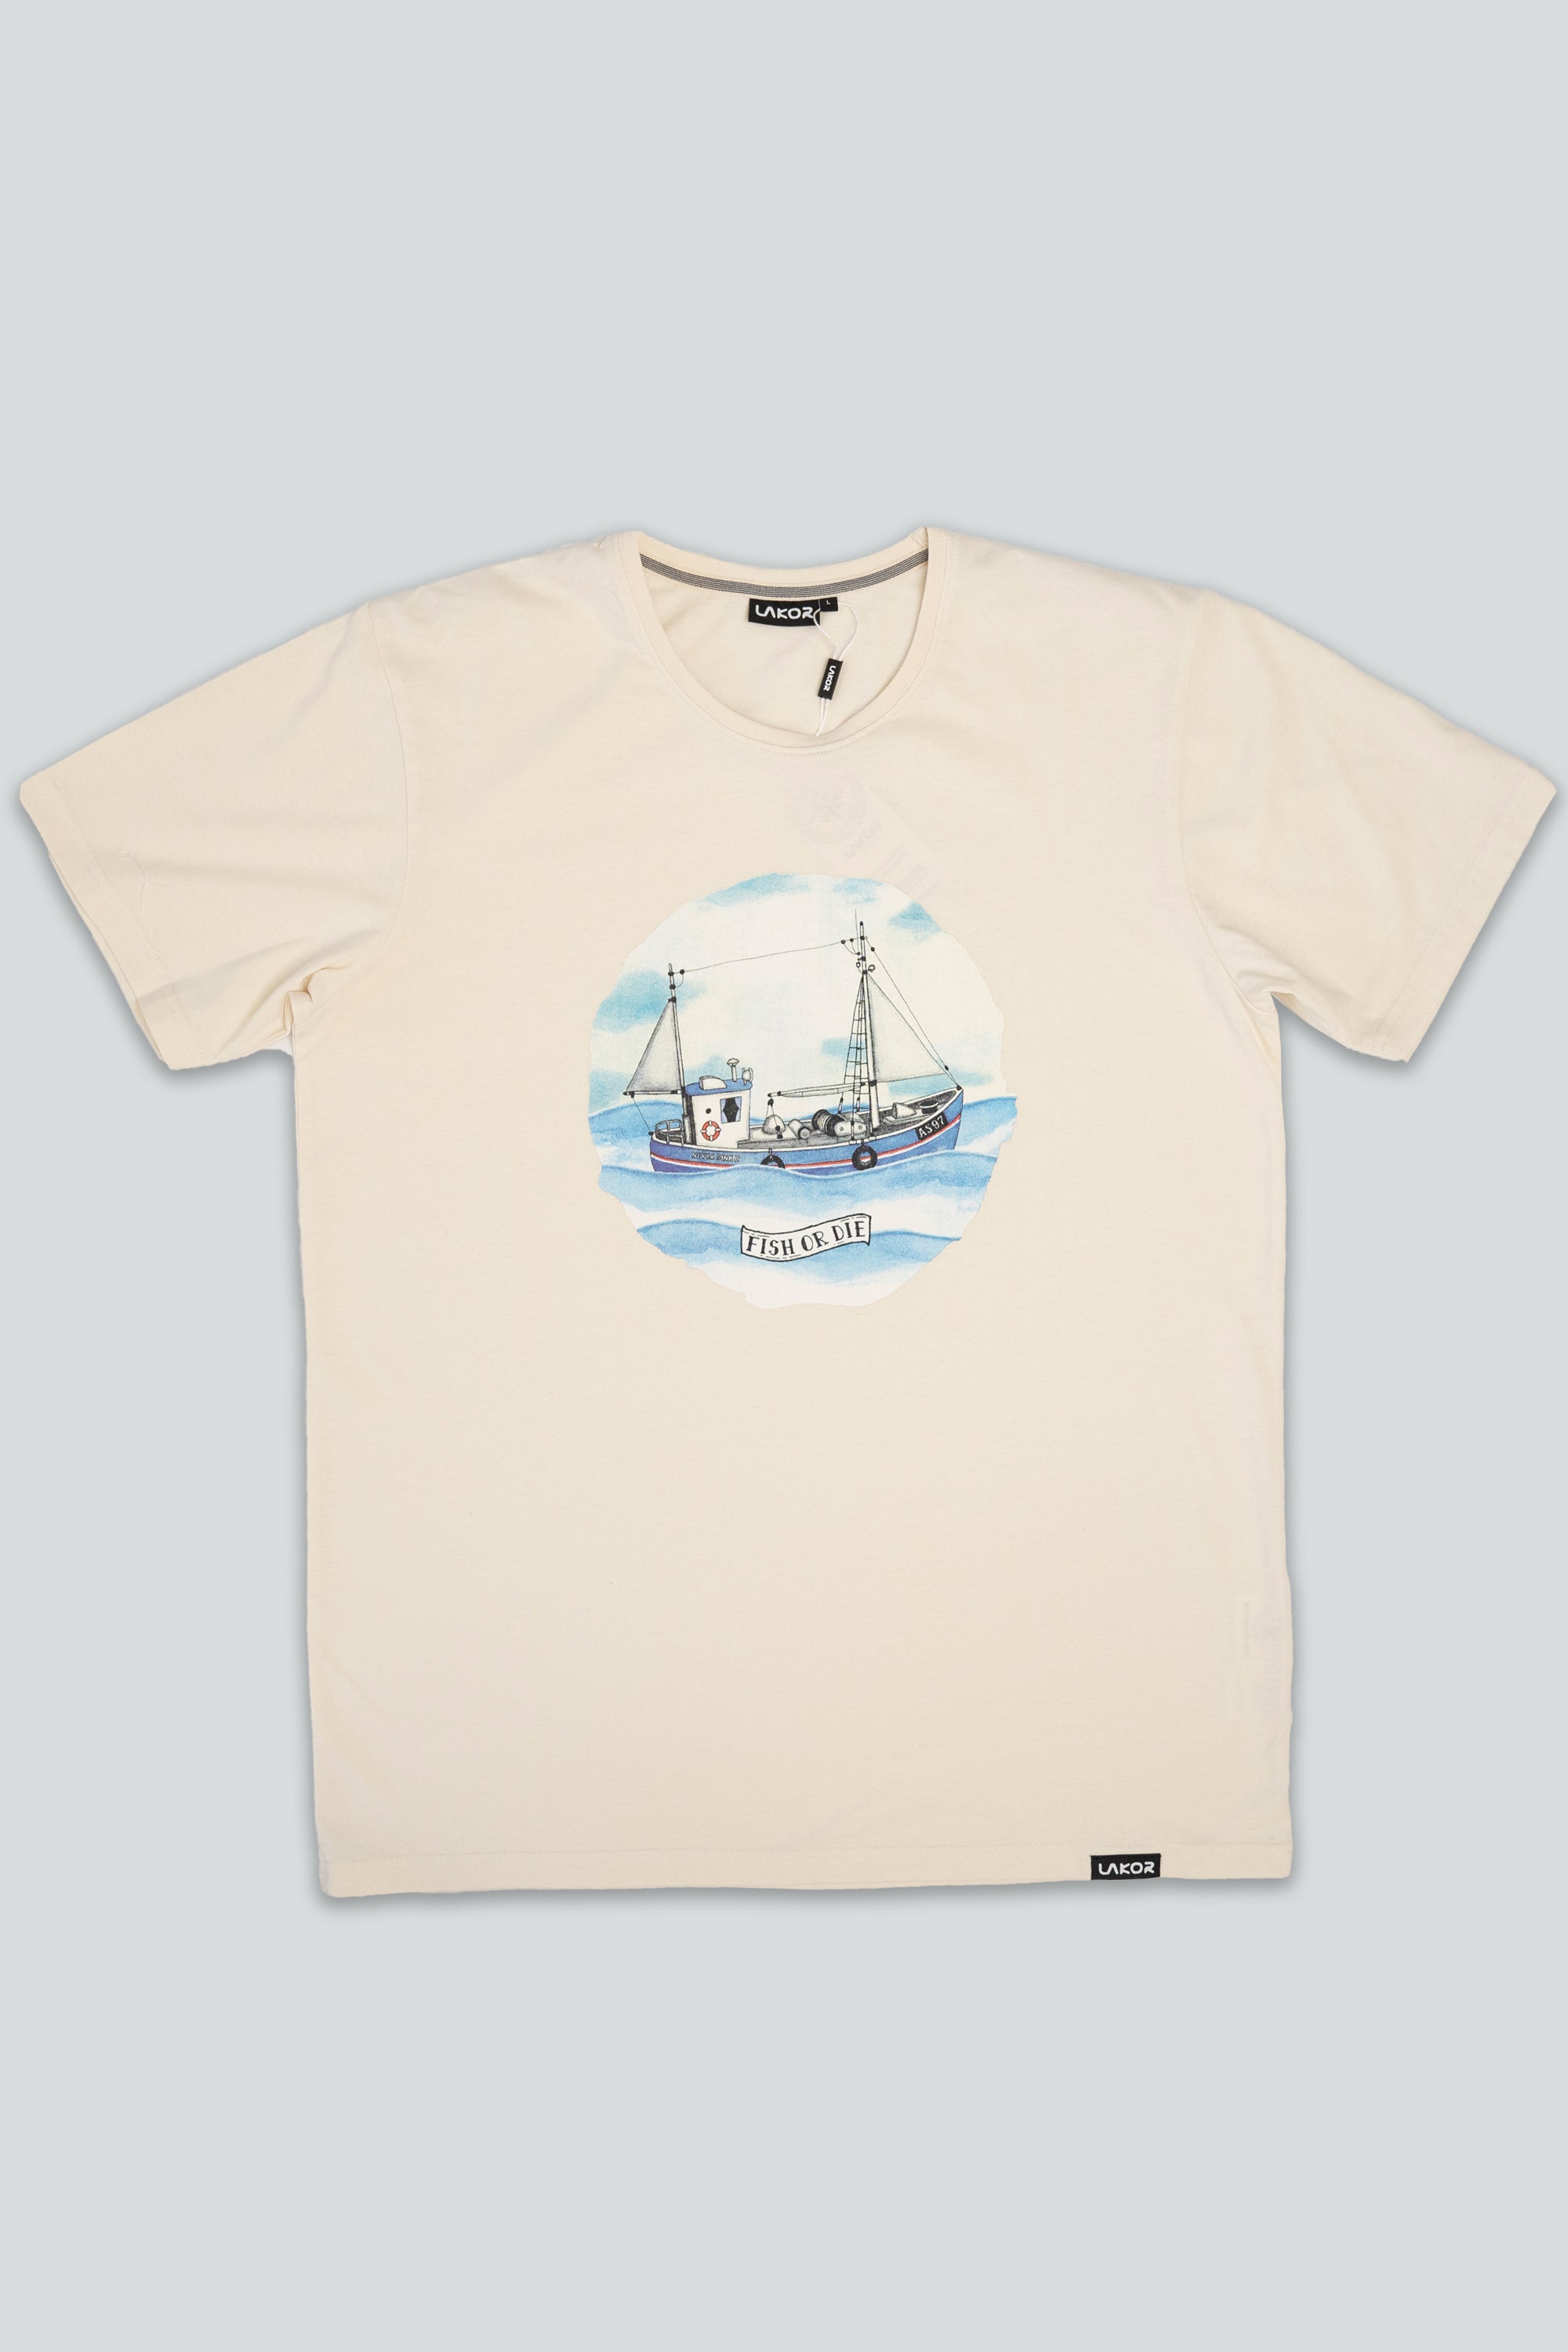 Never Sink 2 T-shirt (Off White)